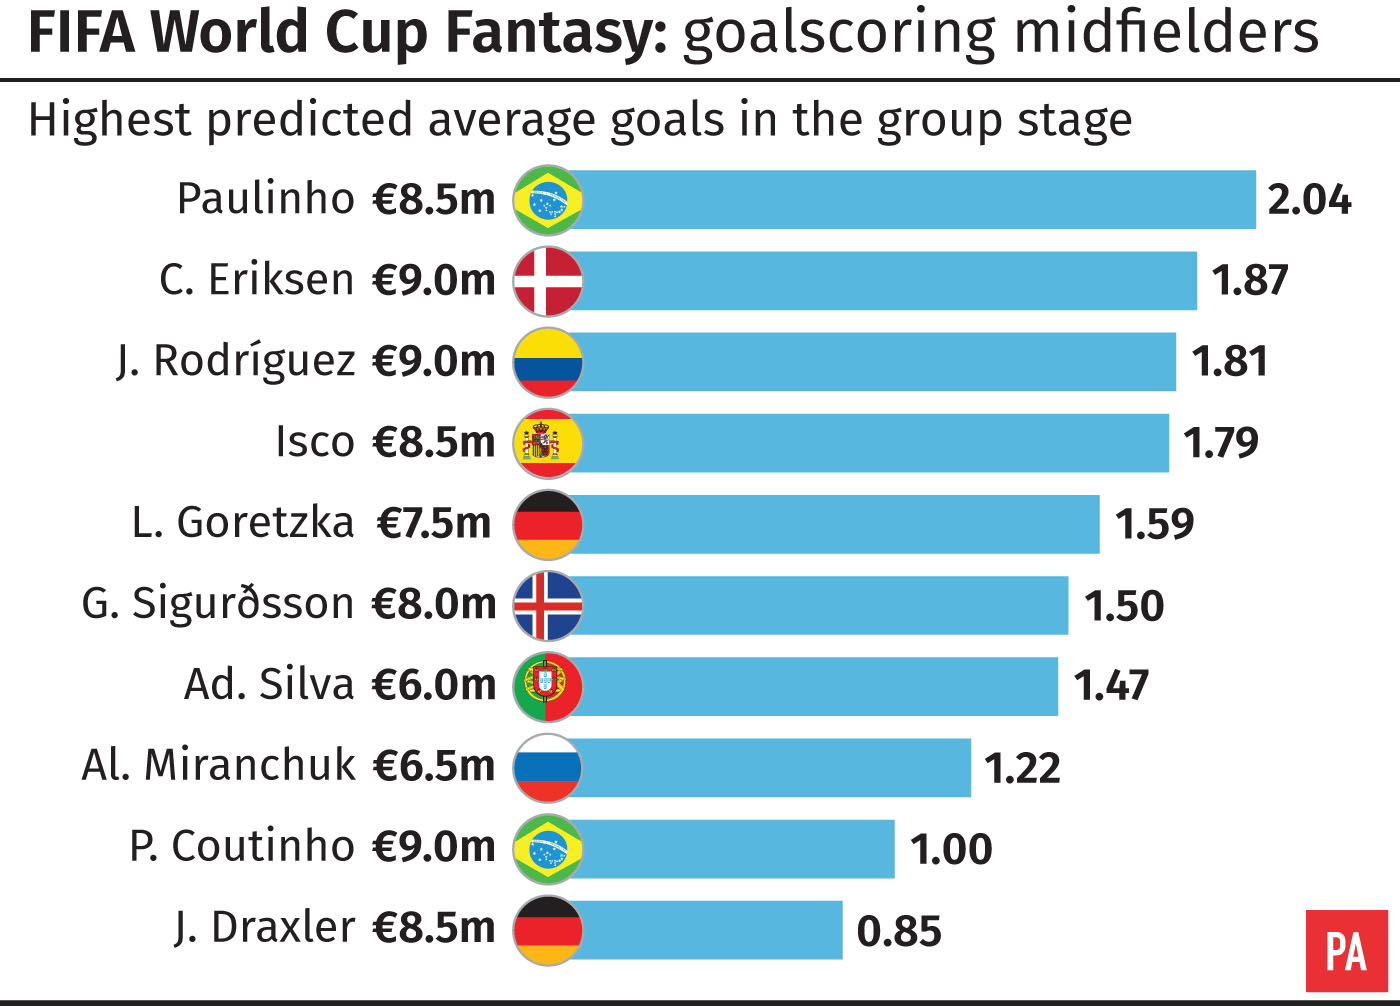 The highest predicted average goals at the group stage of the World Cup for midfielders